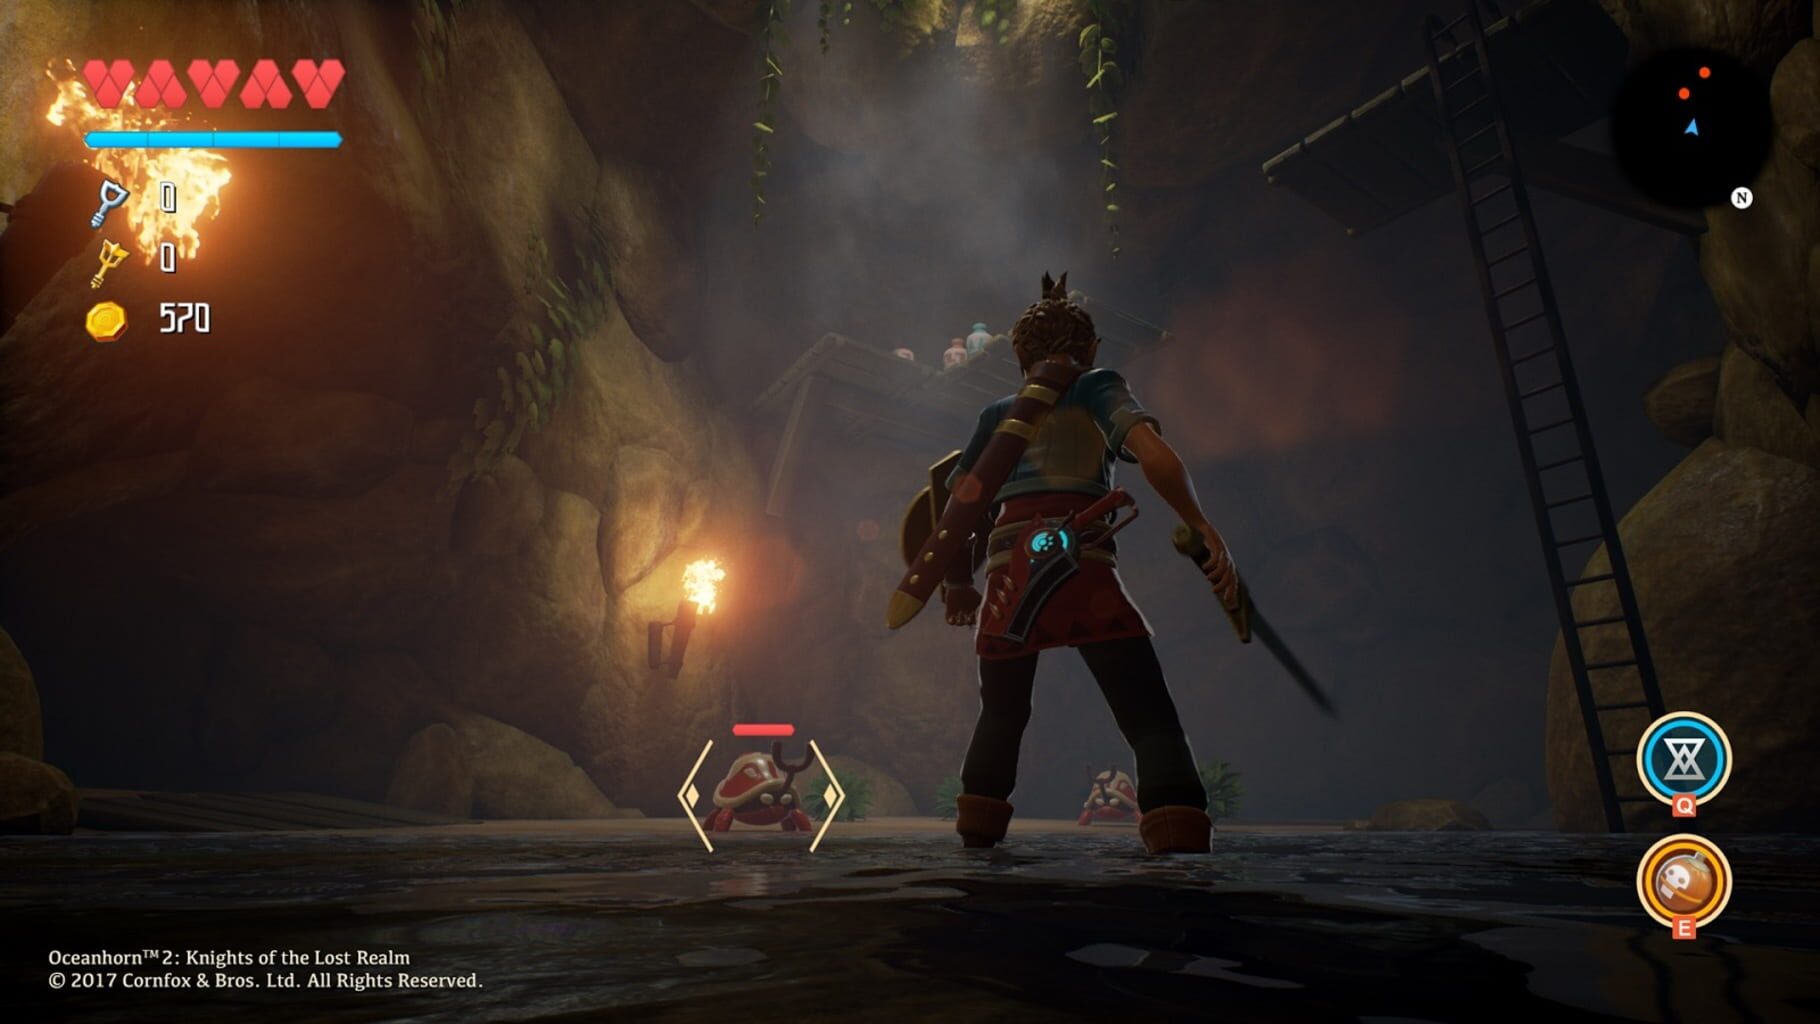 Oceanhorn 2: Knights of the Lost Realm screenshots